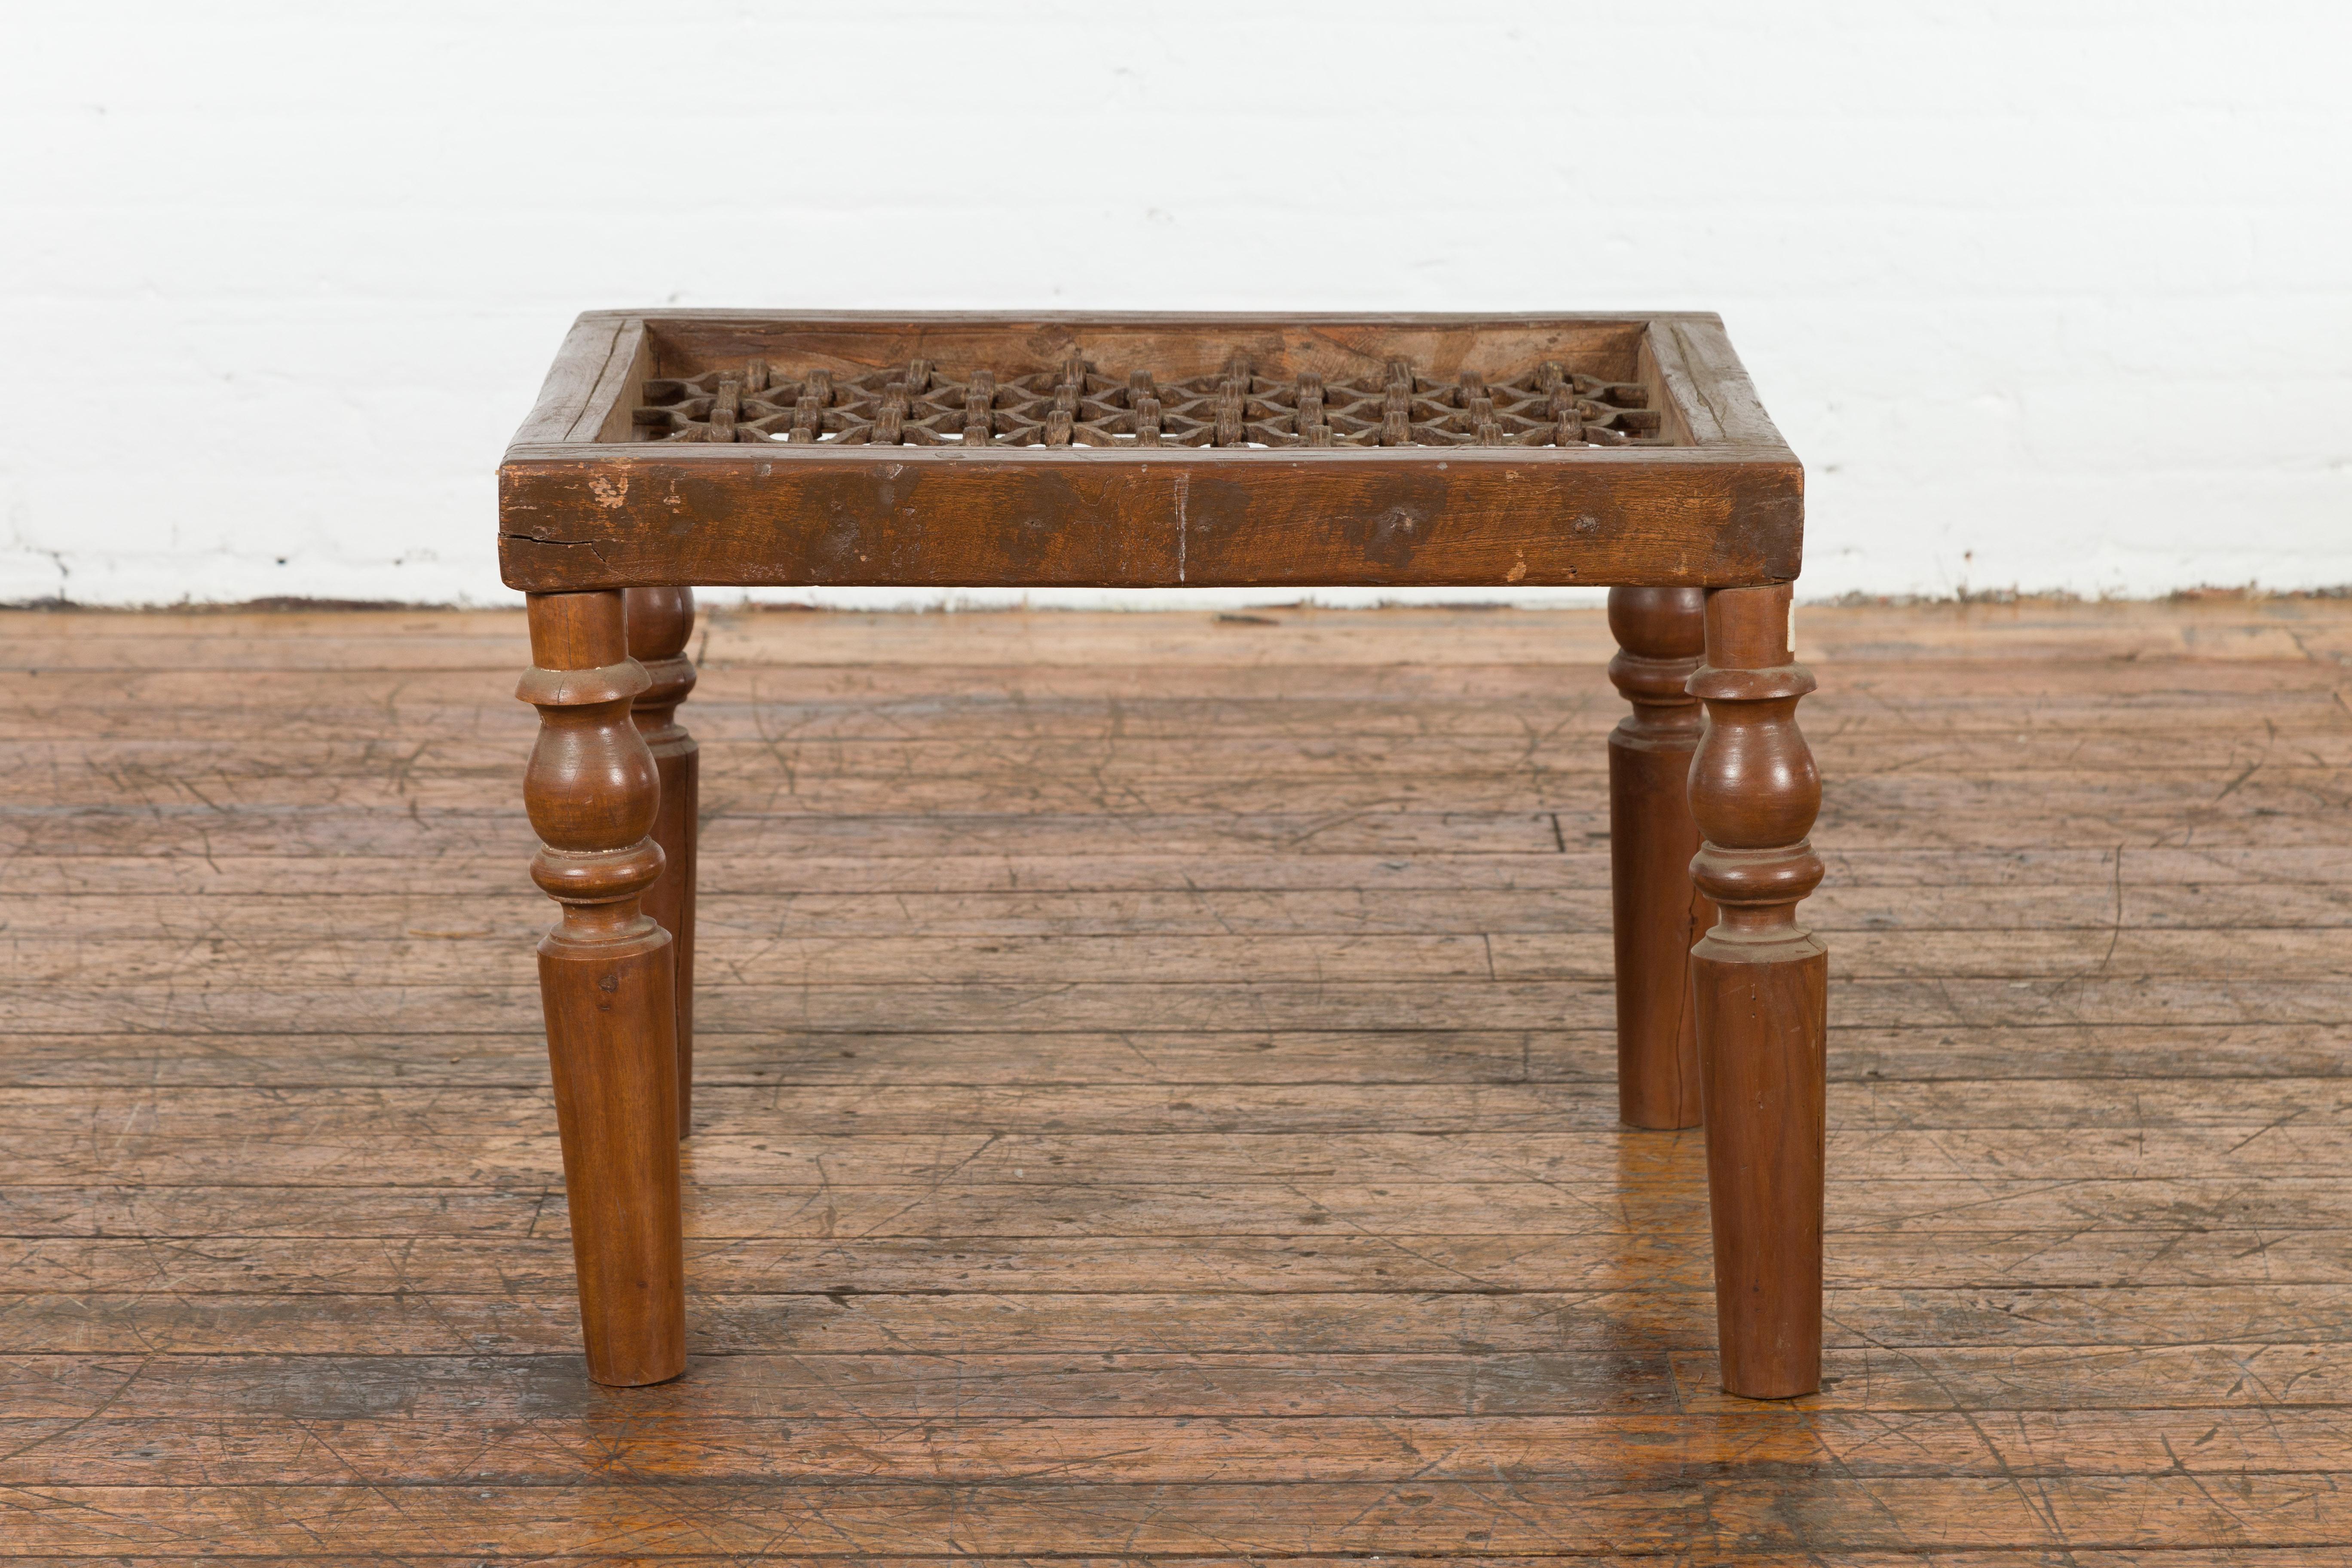 Indian Antique Window Grate Made into a Coffee Table with Turned Baluster Legs In Good Condition For Sale In Yonkers, NY